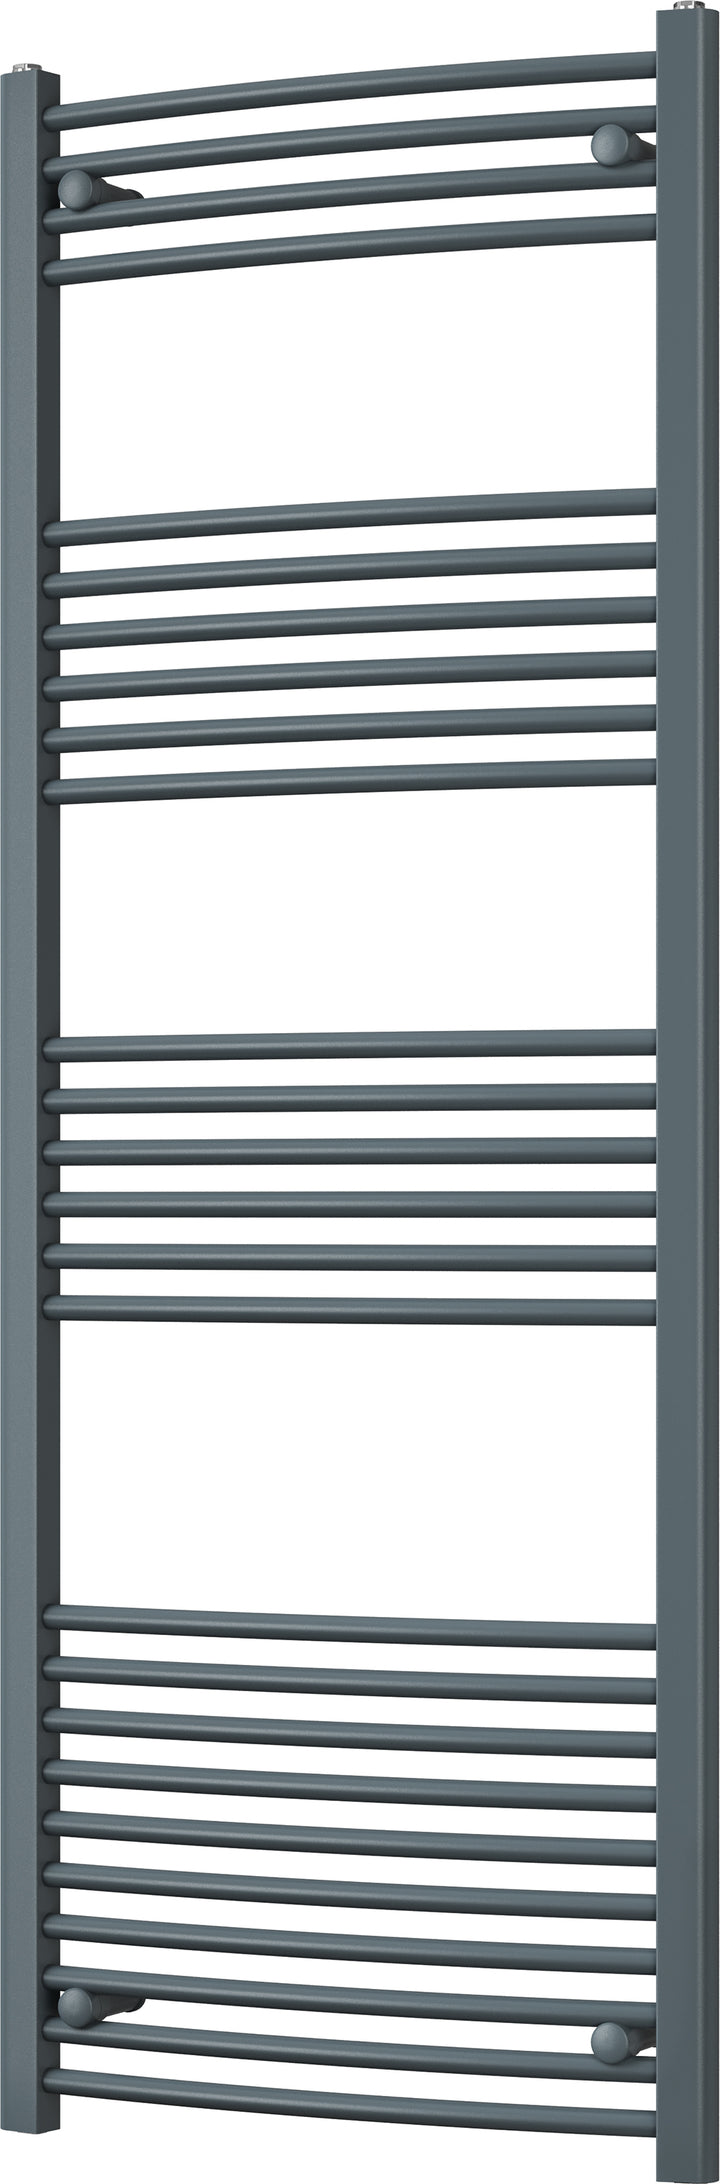 Zennor - Anthracite Heated Towel Rail - H1600mm x W600mm - Curved